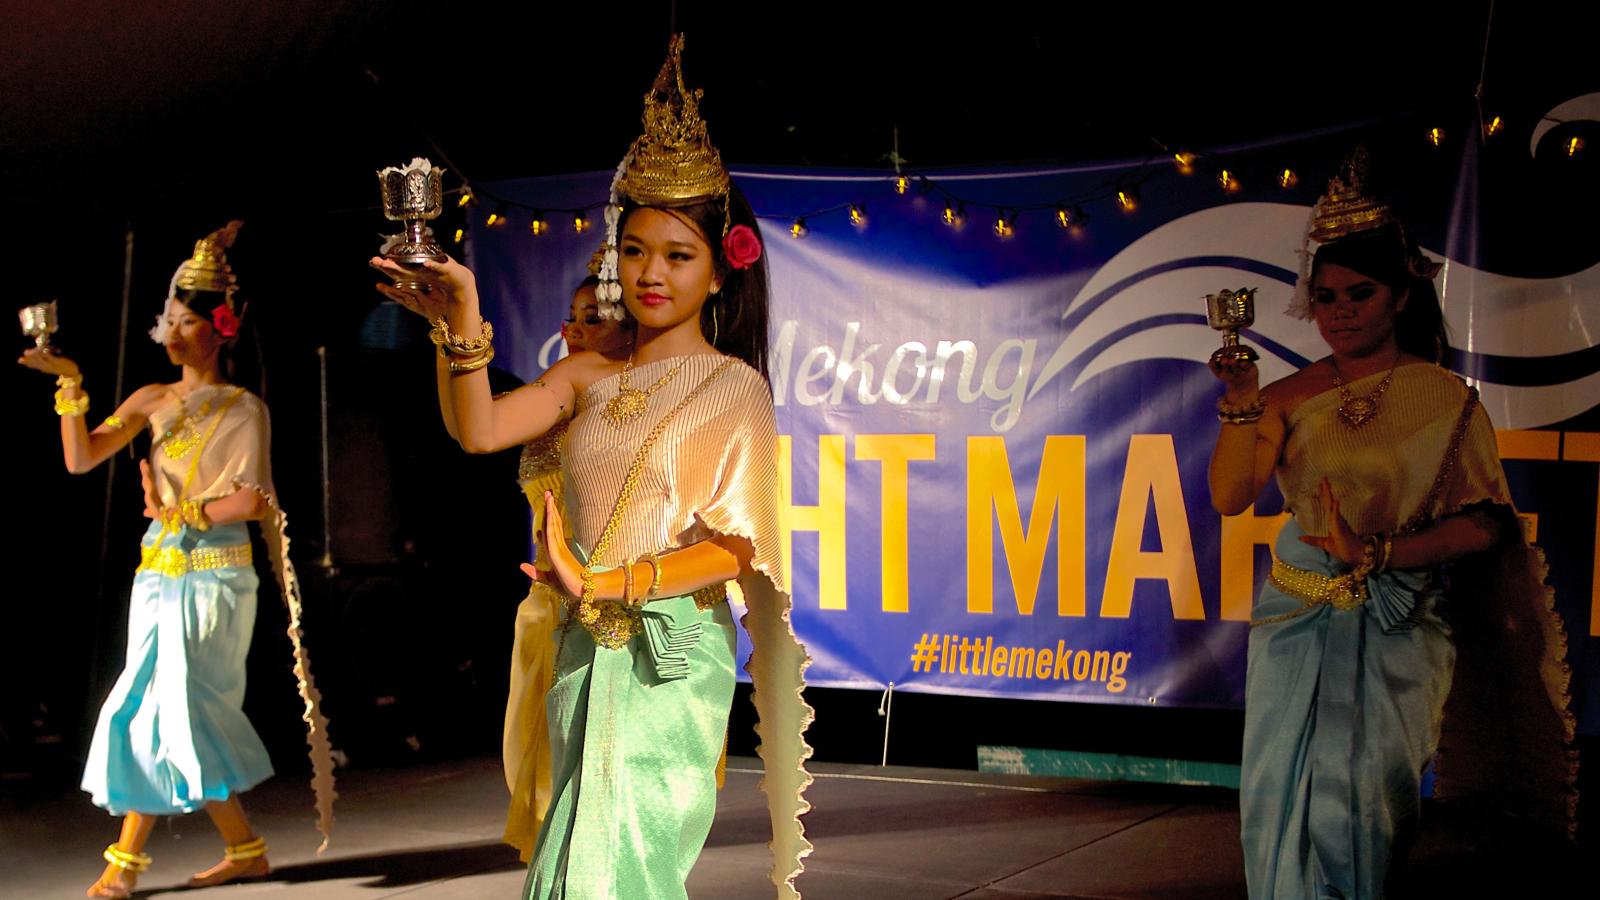 Women in Cambodian garb of blue and yellow in parade down the street, in front of a banner. 